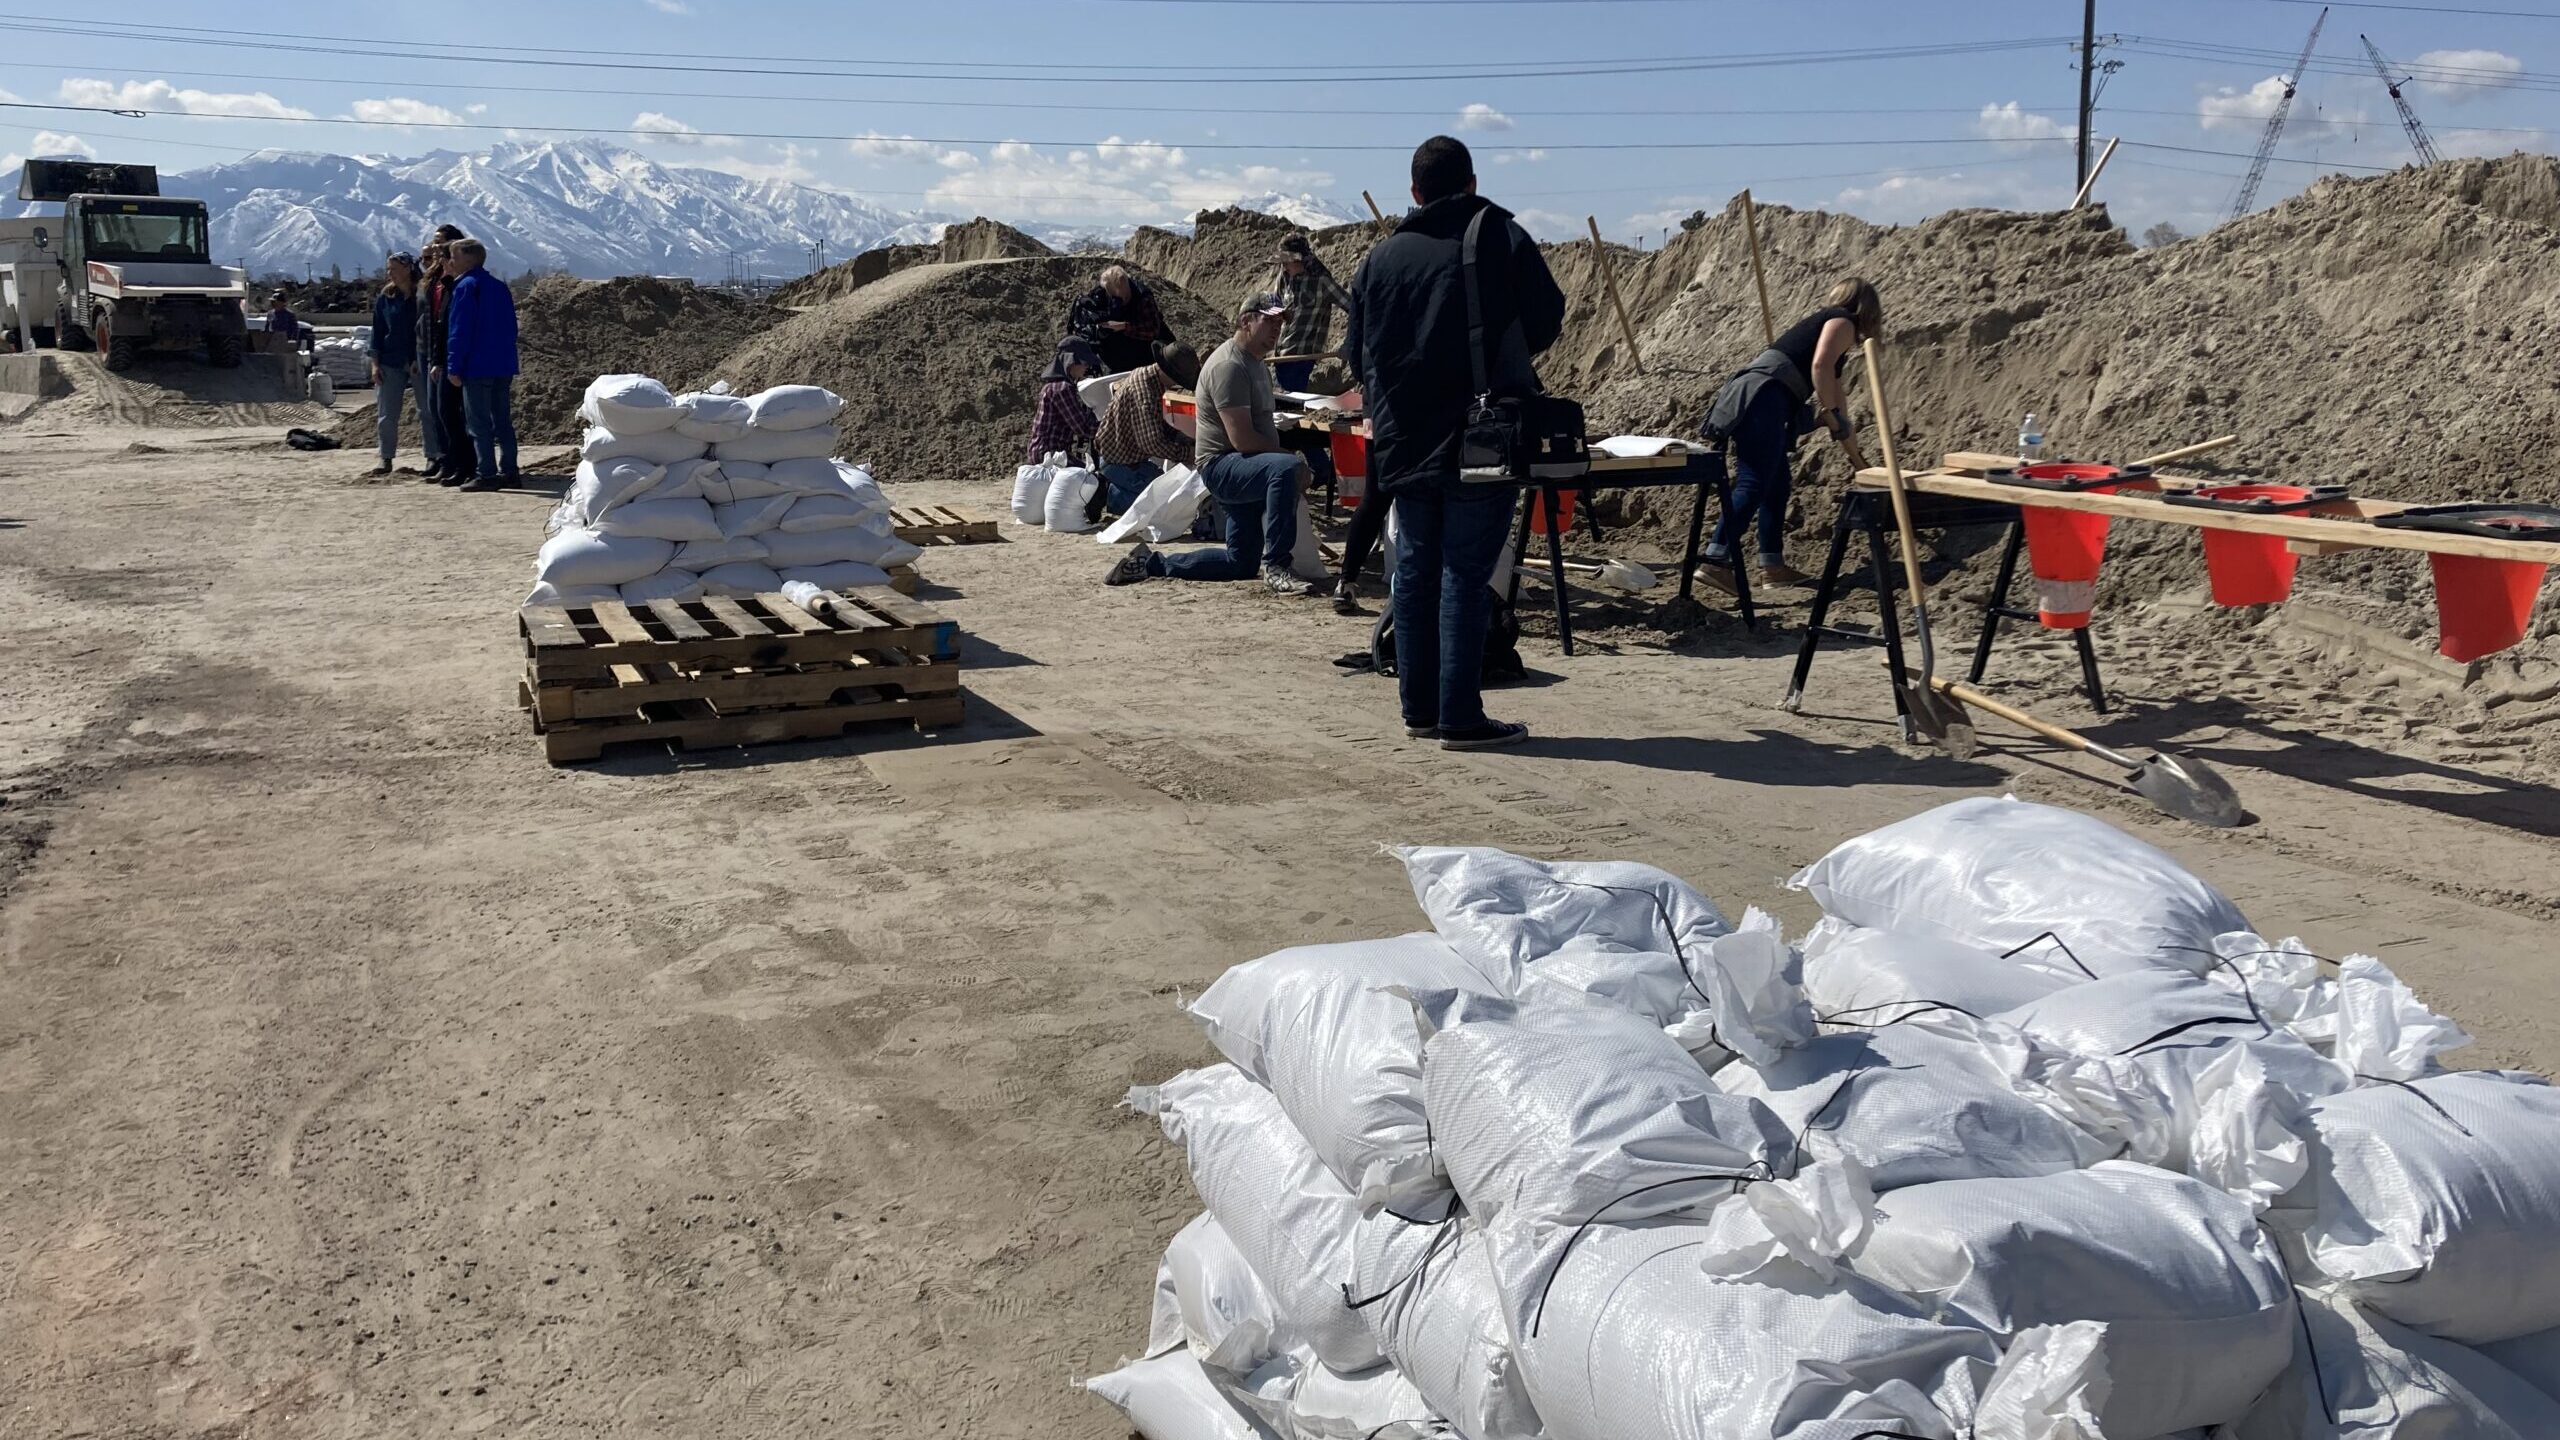 Tens of thousands of sandbags are being filled in Provo in preparation for upcoming floods. (Credit...